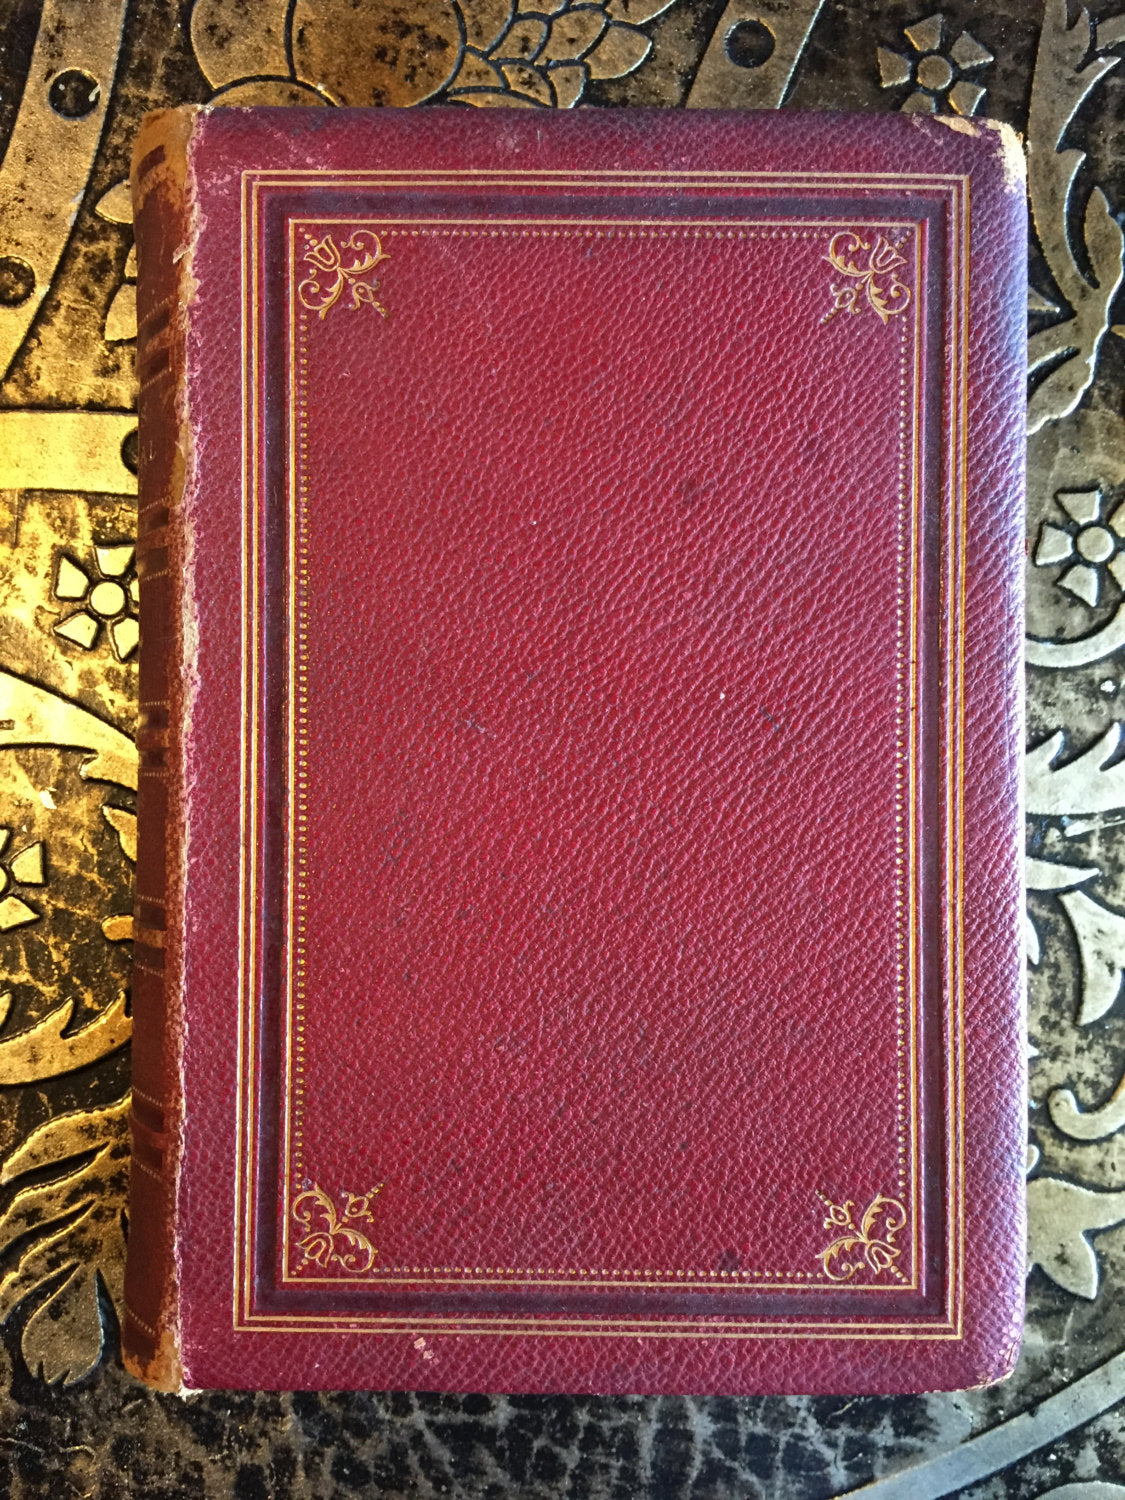 The Poetical Works of Mrs. Felicia Hemans, Leather Bound, c1884, Illustrated